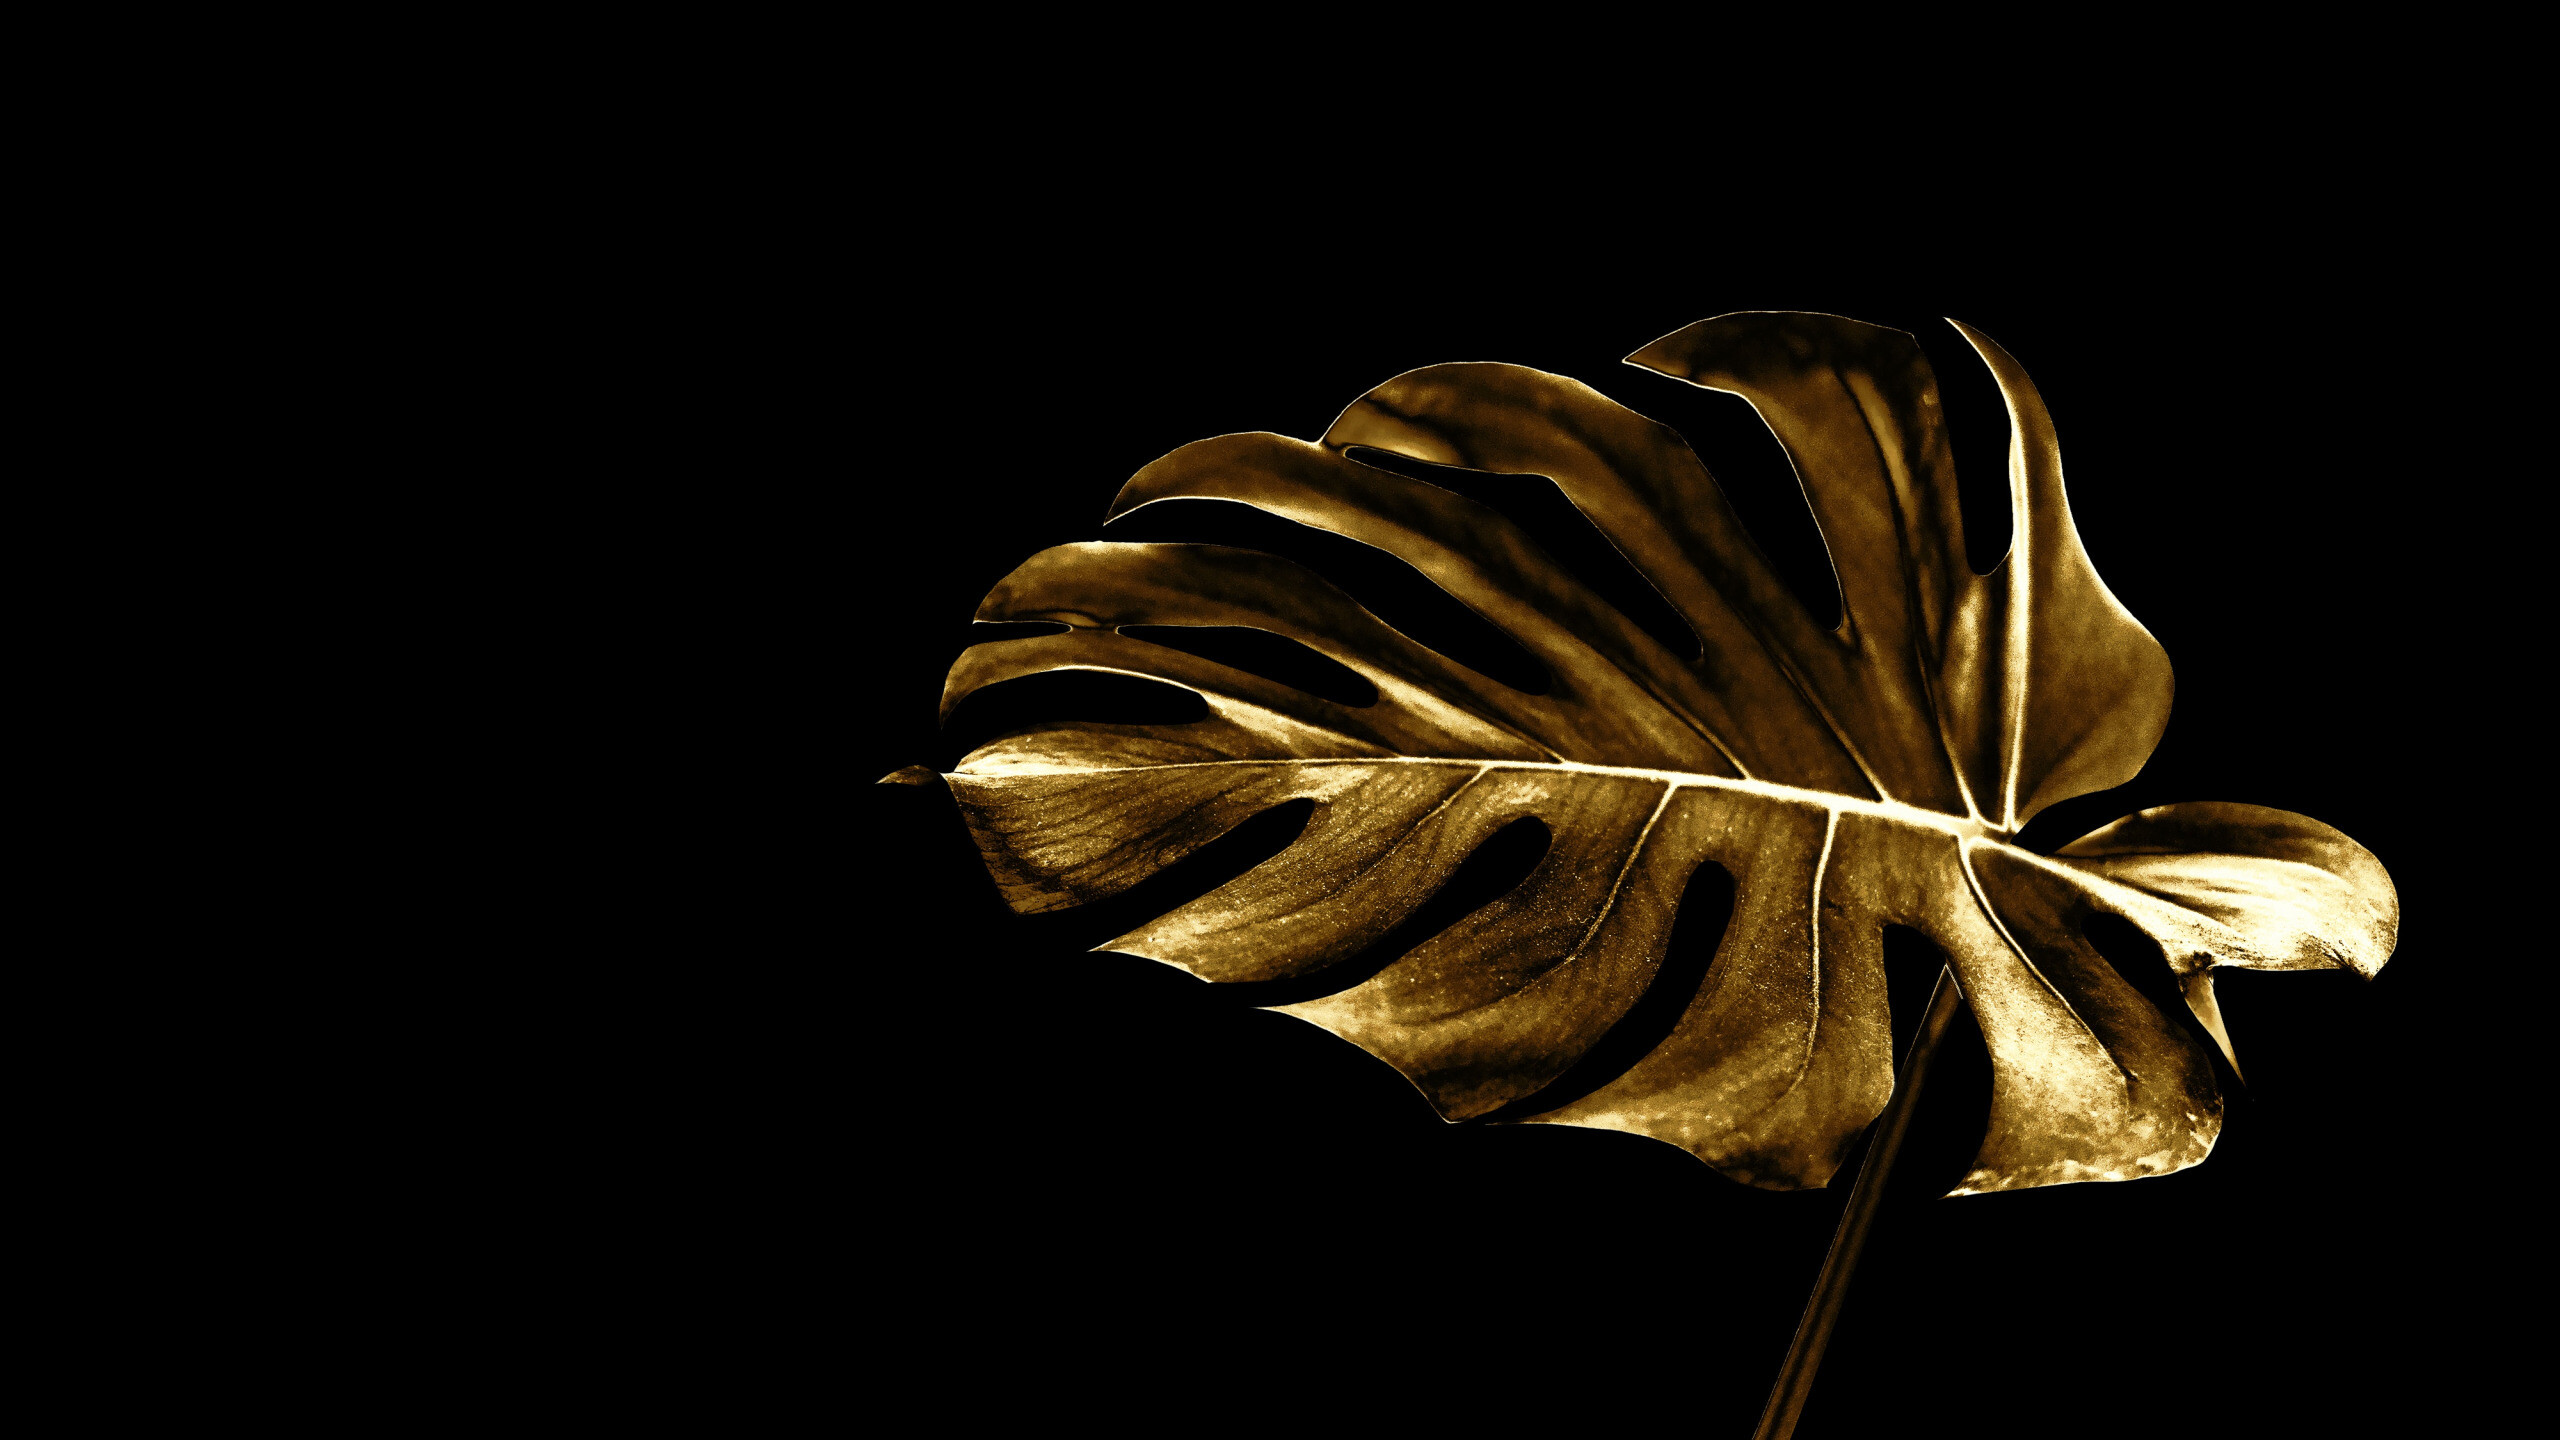 Gold Leaf: Gold leaves for decorative purposes, Monstera deliciosa, A species of flowering plant native to tropical forests. 2560x1440 HD Wallpaper.